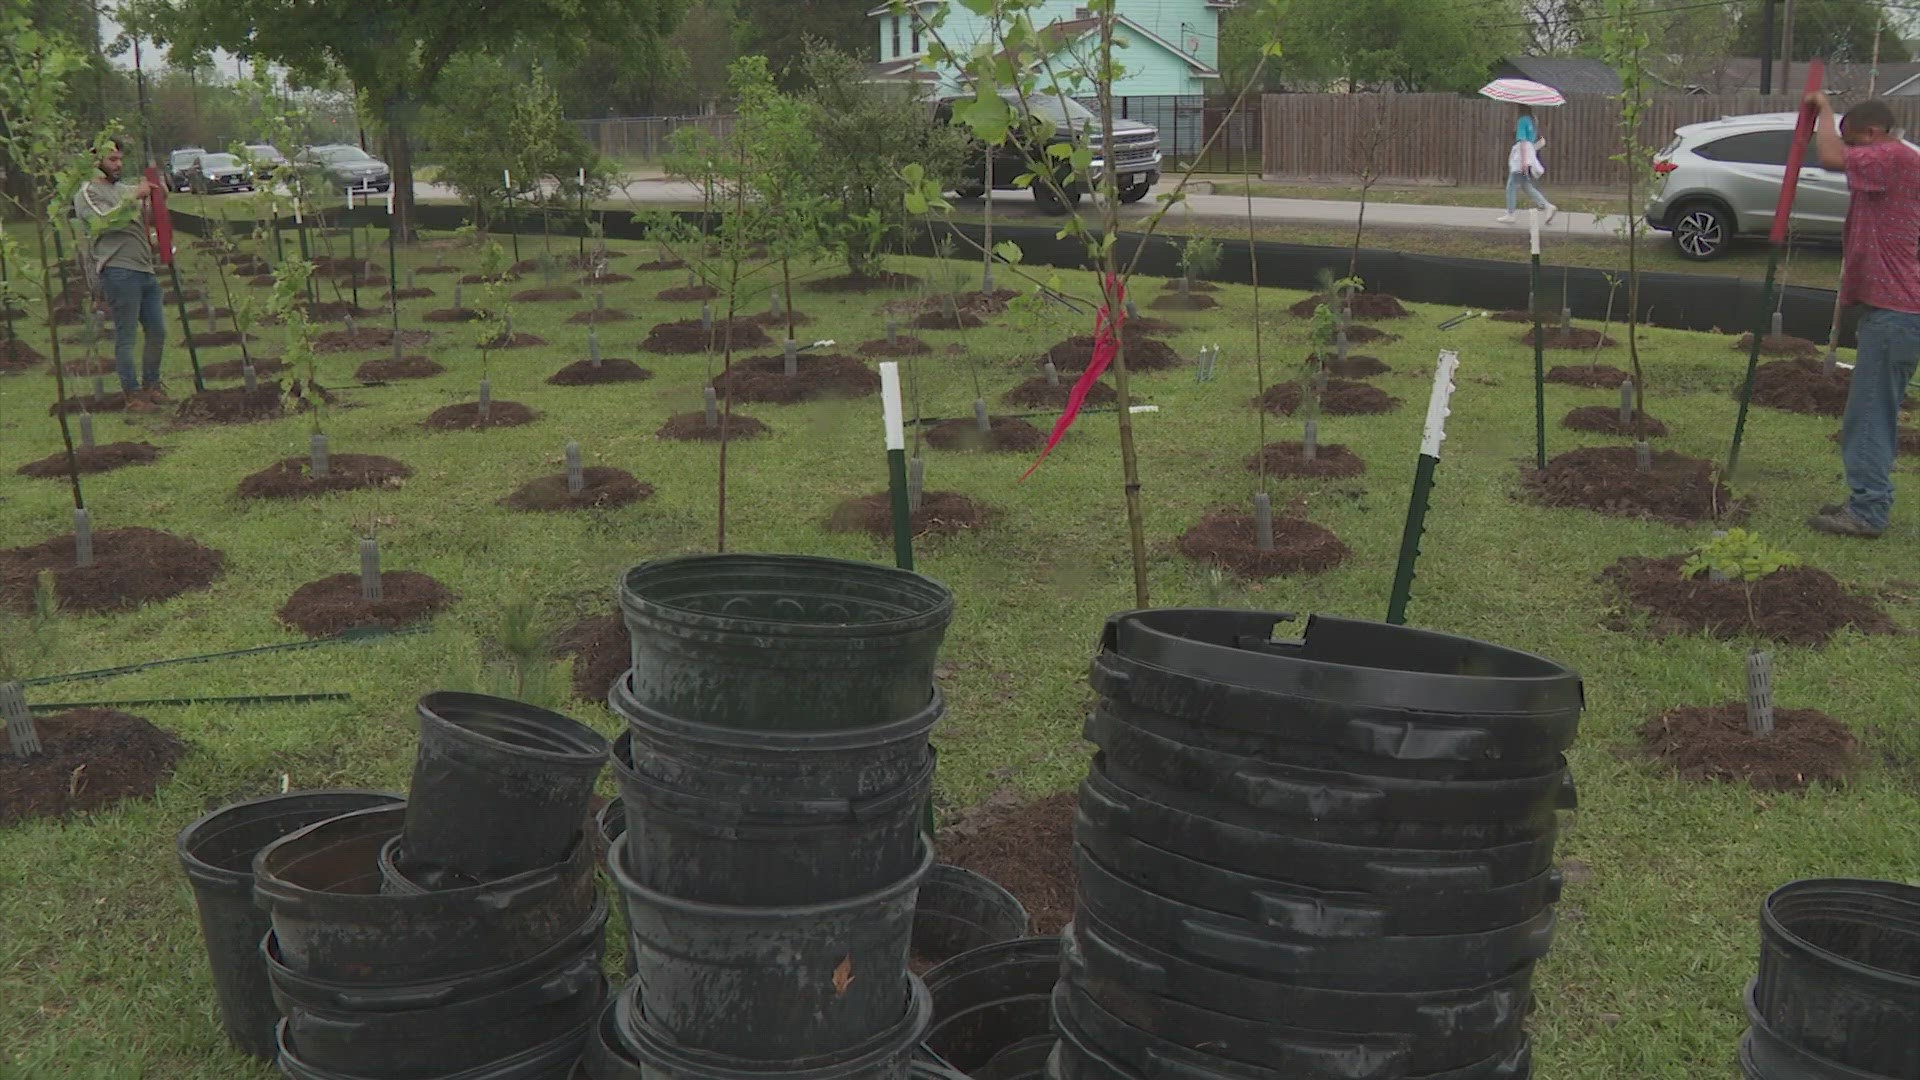 Mayor Sylvester Turner said the city aims to plant 4.6 million trees by the year 2030.